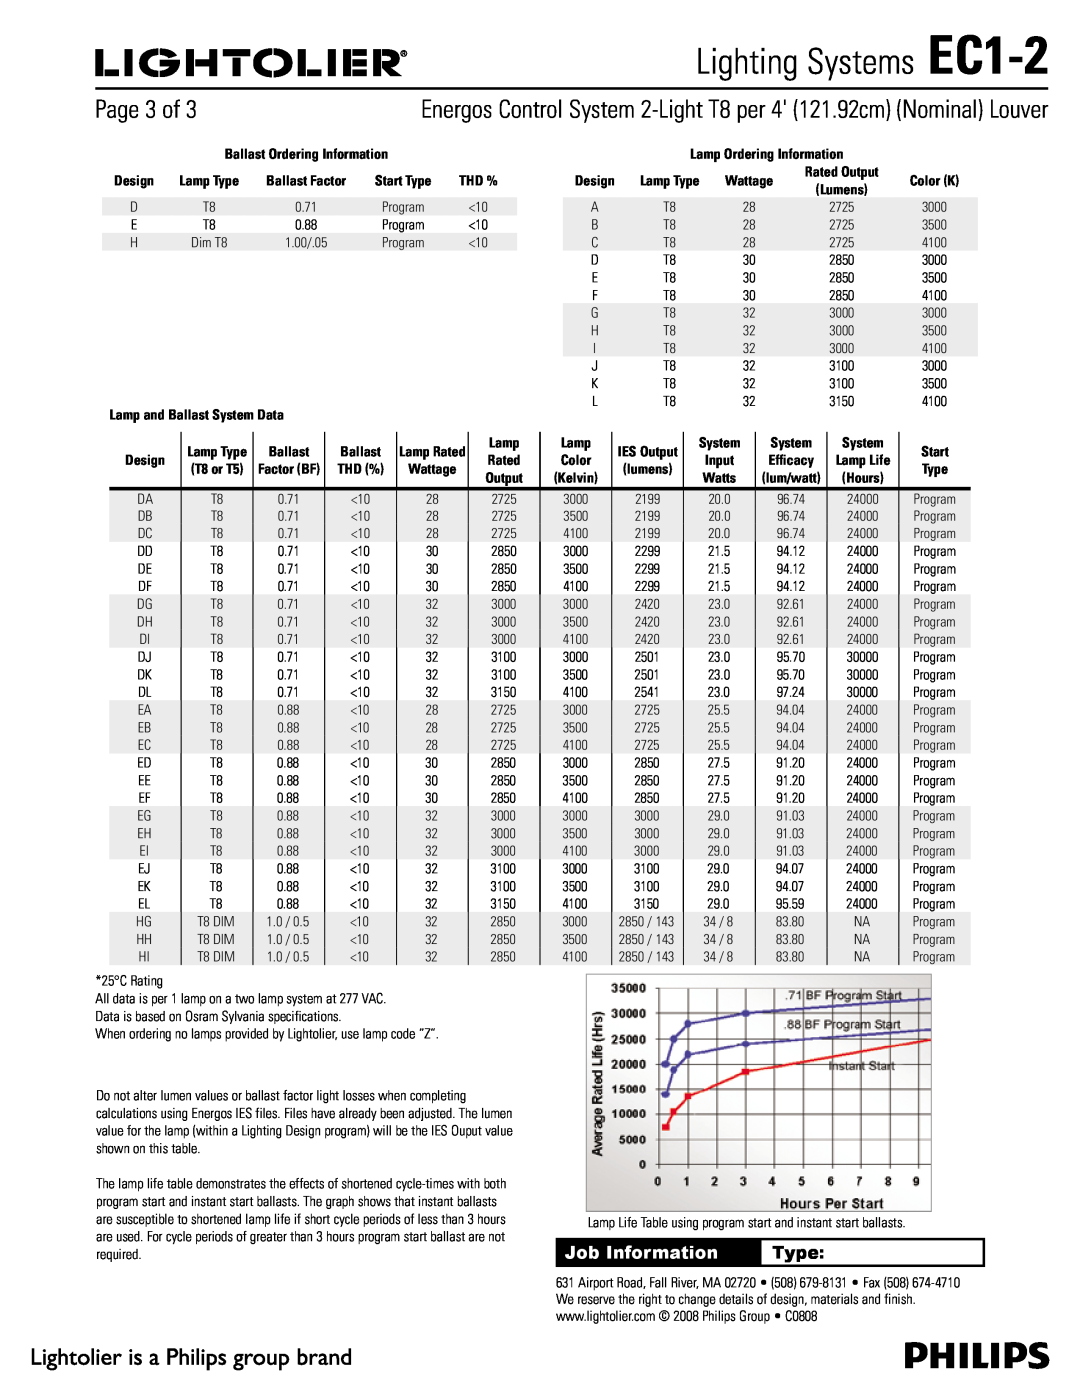 Lightolier specifications Page 3 of, Lighting Systems EC1-2, Job Information, Type, Lamp Ordering Information, Wattage 